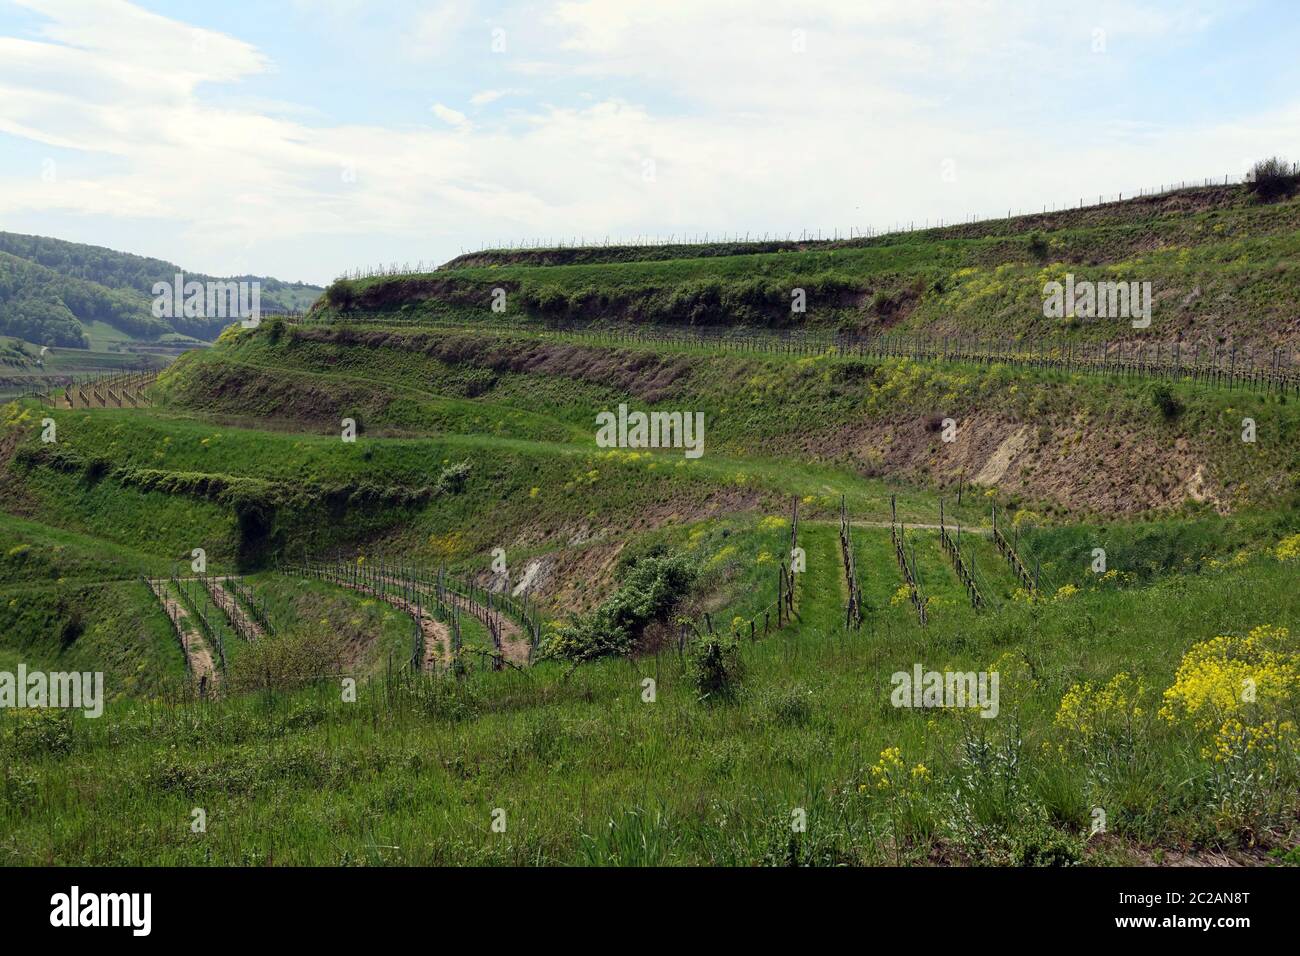 Viticulture on small terraces at Schelinger Kirchberg Stock Photo